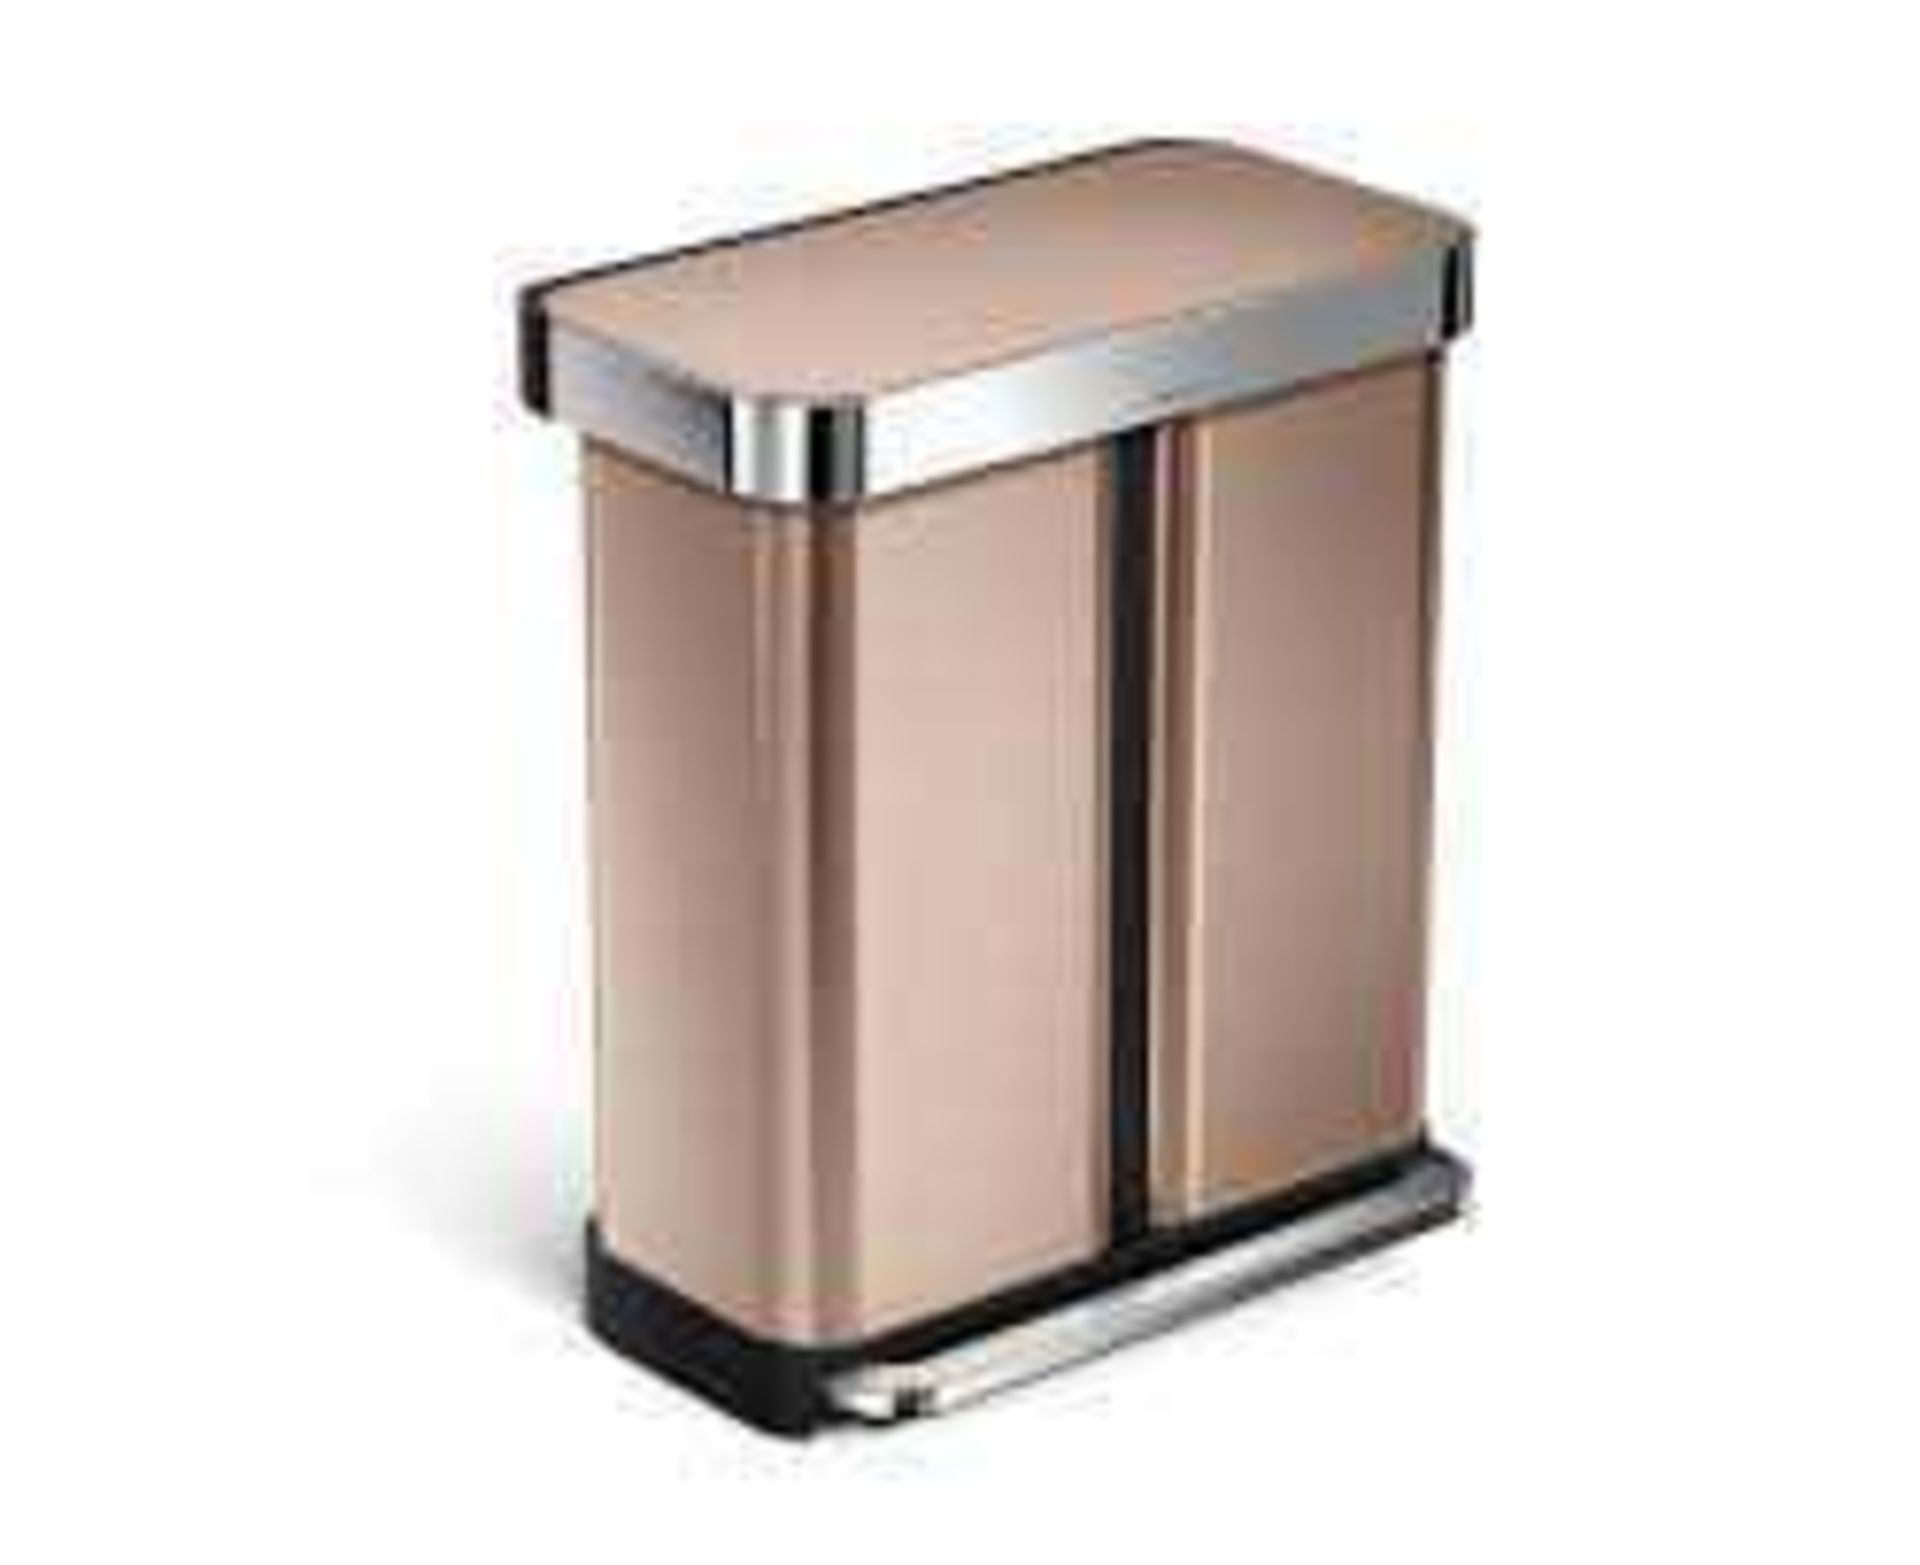 Rrp £280 Boxed Simplehuman Sensor Recycling Bin With Voice Sensor And Motion Sensor In Rose Gold Wit